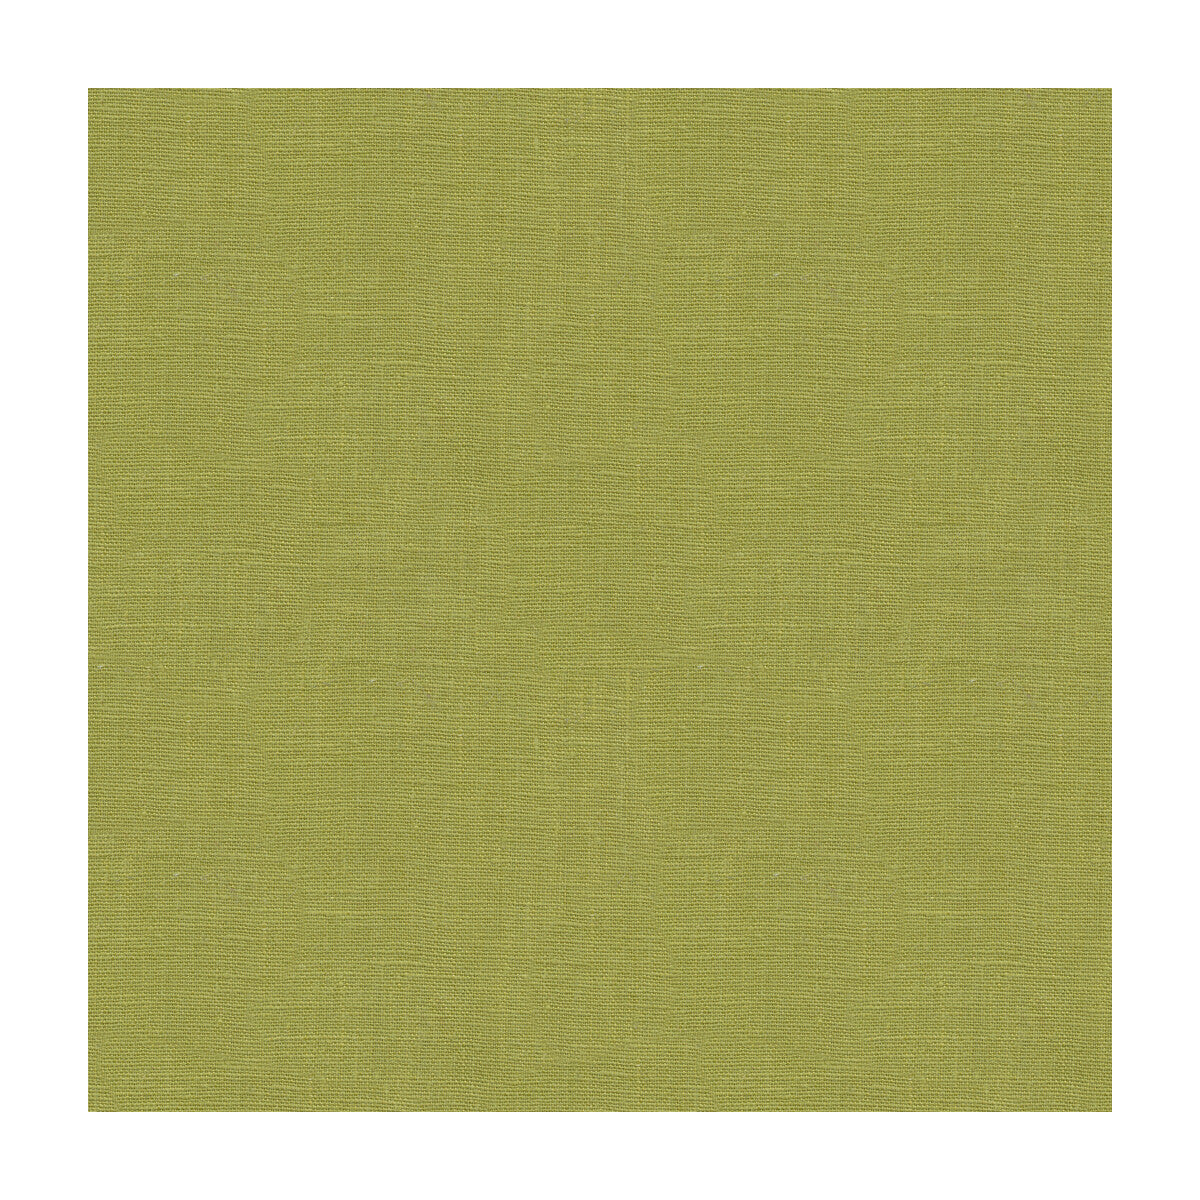 Dublin Linen fabric in meadow color - pattern 2012175.3.0 - by Lee Jofa in the Colour Complements II collection